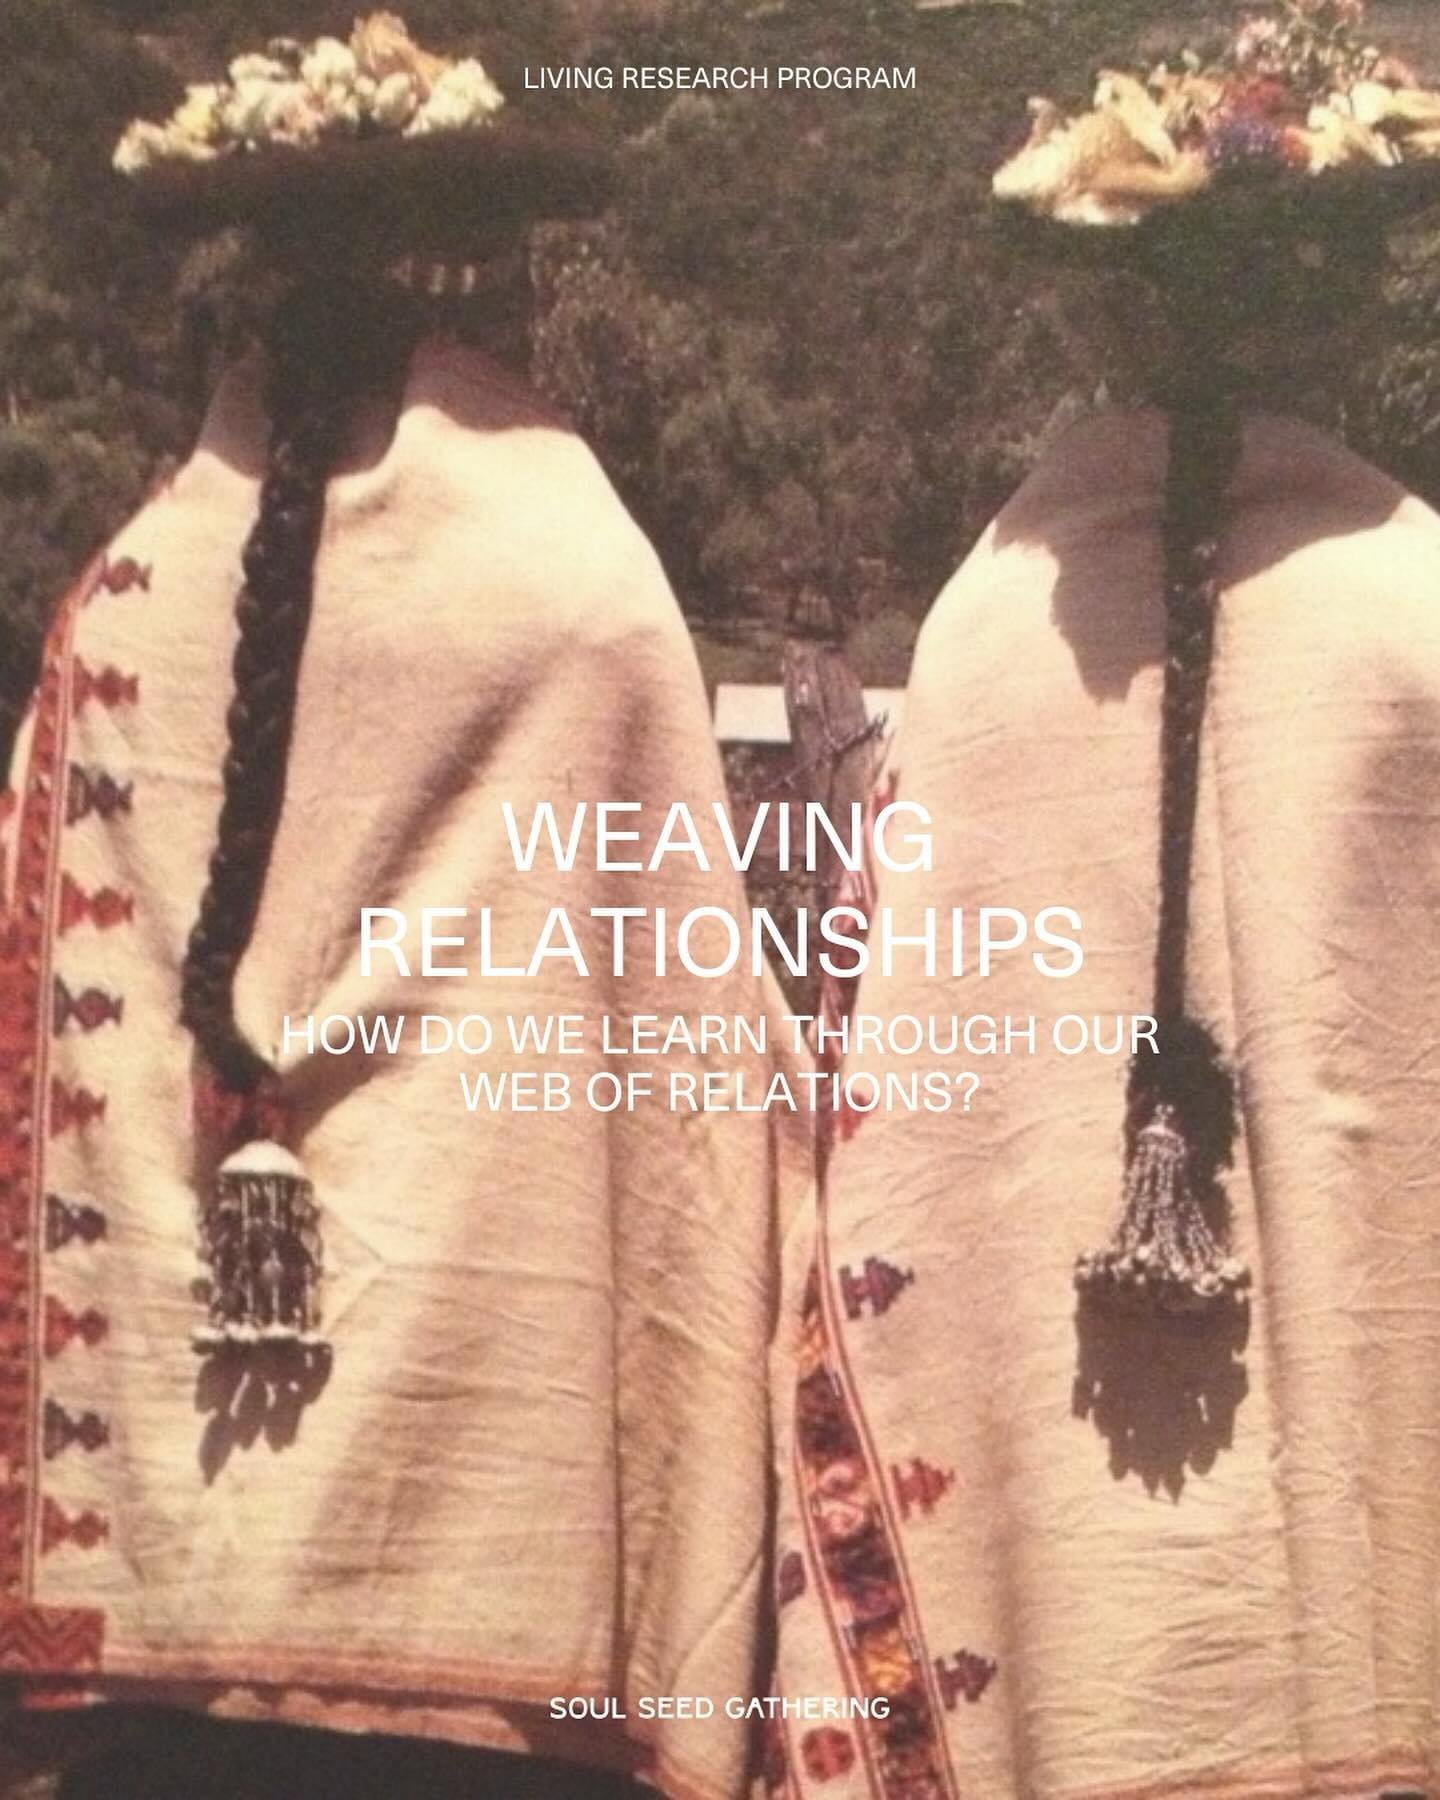 WEAVING RELATIONSHIPS

How do we research and learn through our web of relations?

&lsquo;People focus on points of connection, the nodes of interest like stars in the sky, but the real understanding comes in the spaces in between, in the relational 